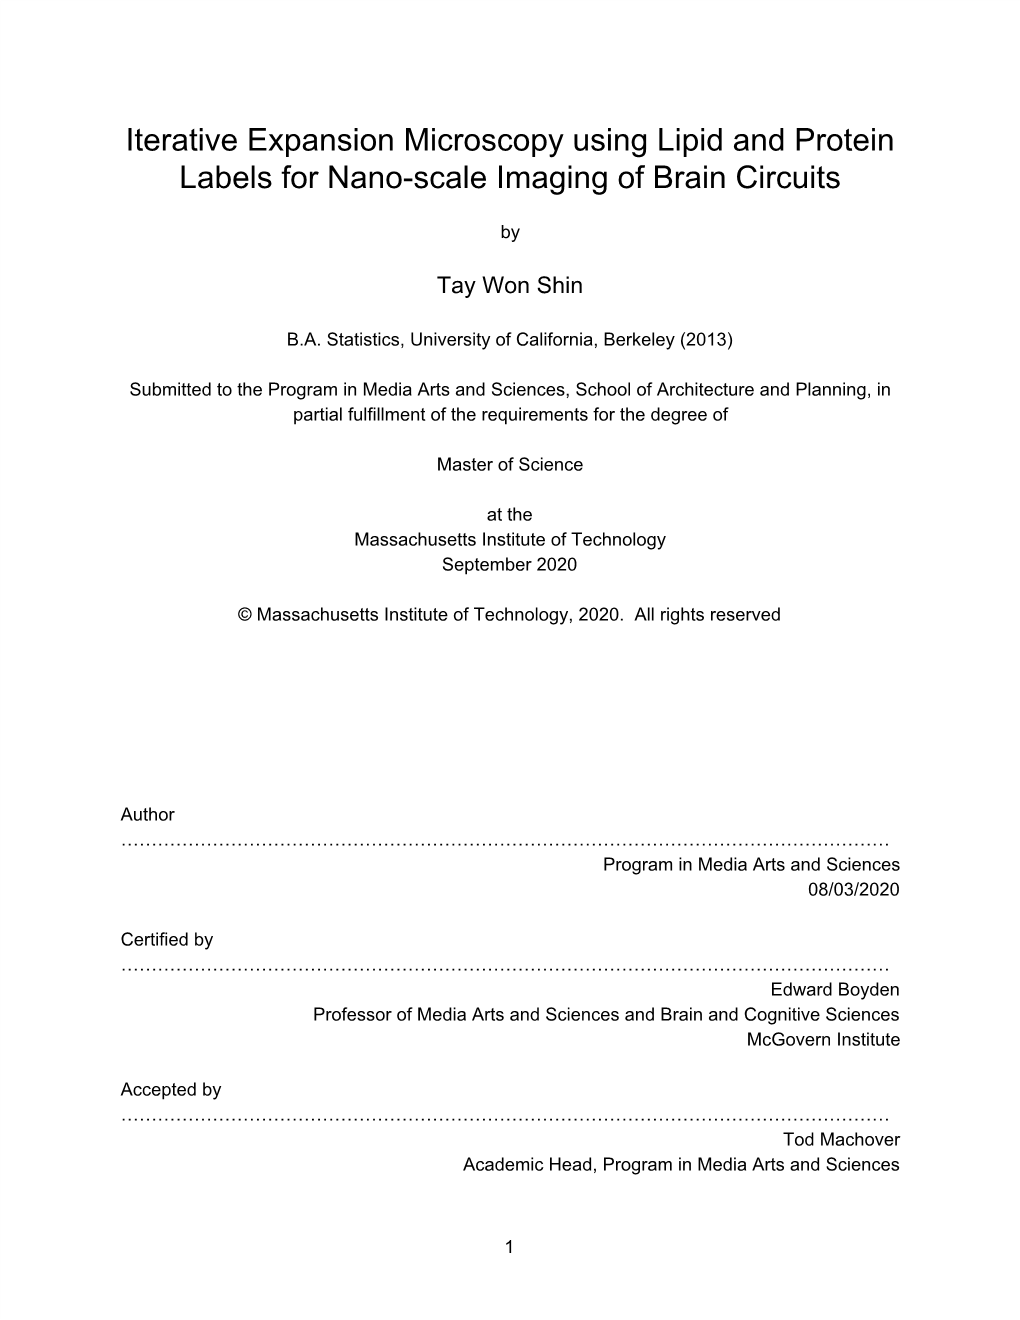 Iterative Expansion Microscopy Using Lipid and Protein Labels for Nano-Scale Imaging of Brain Circuits